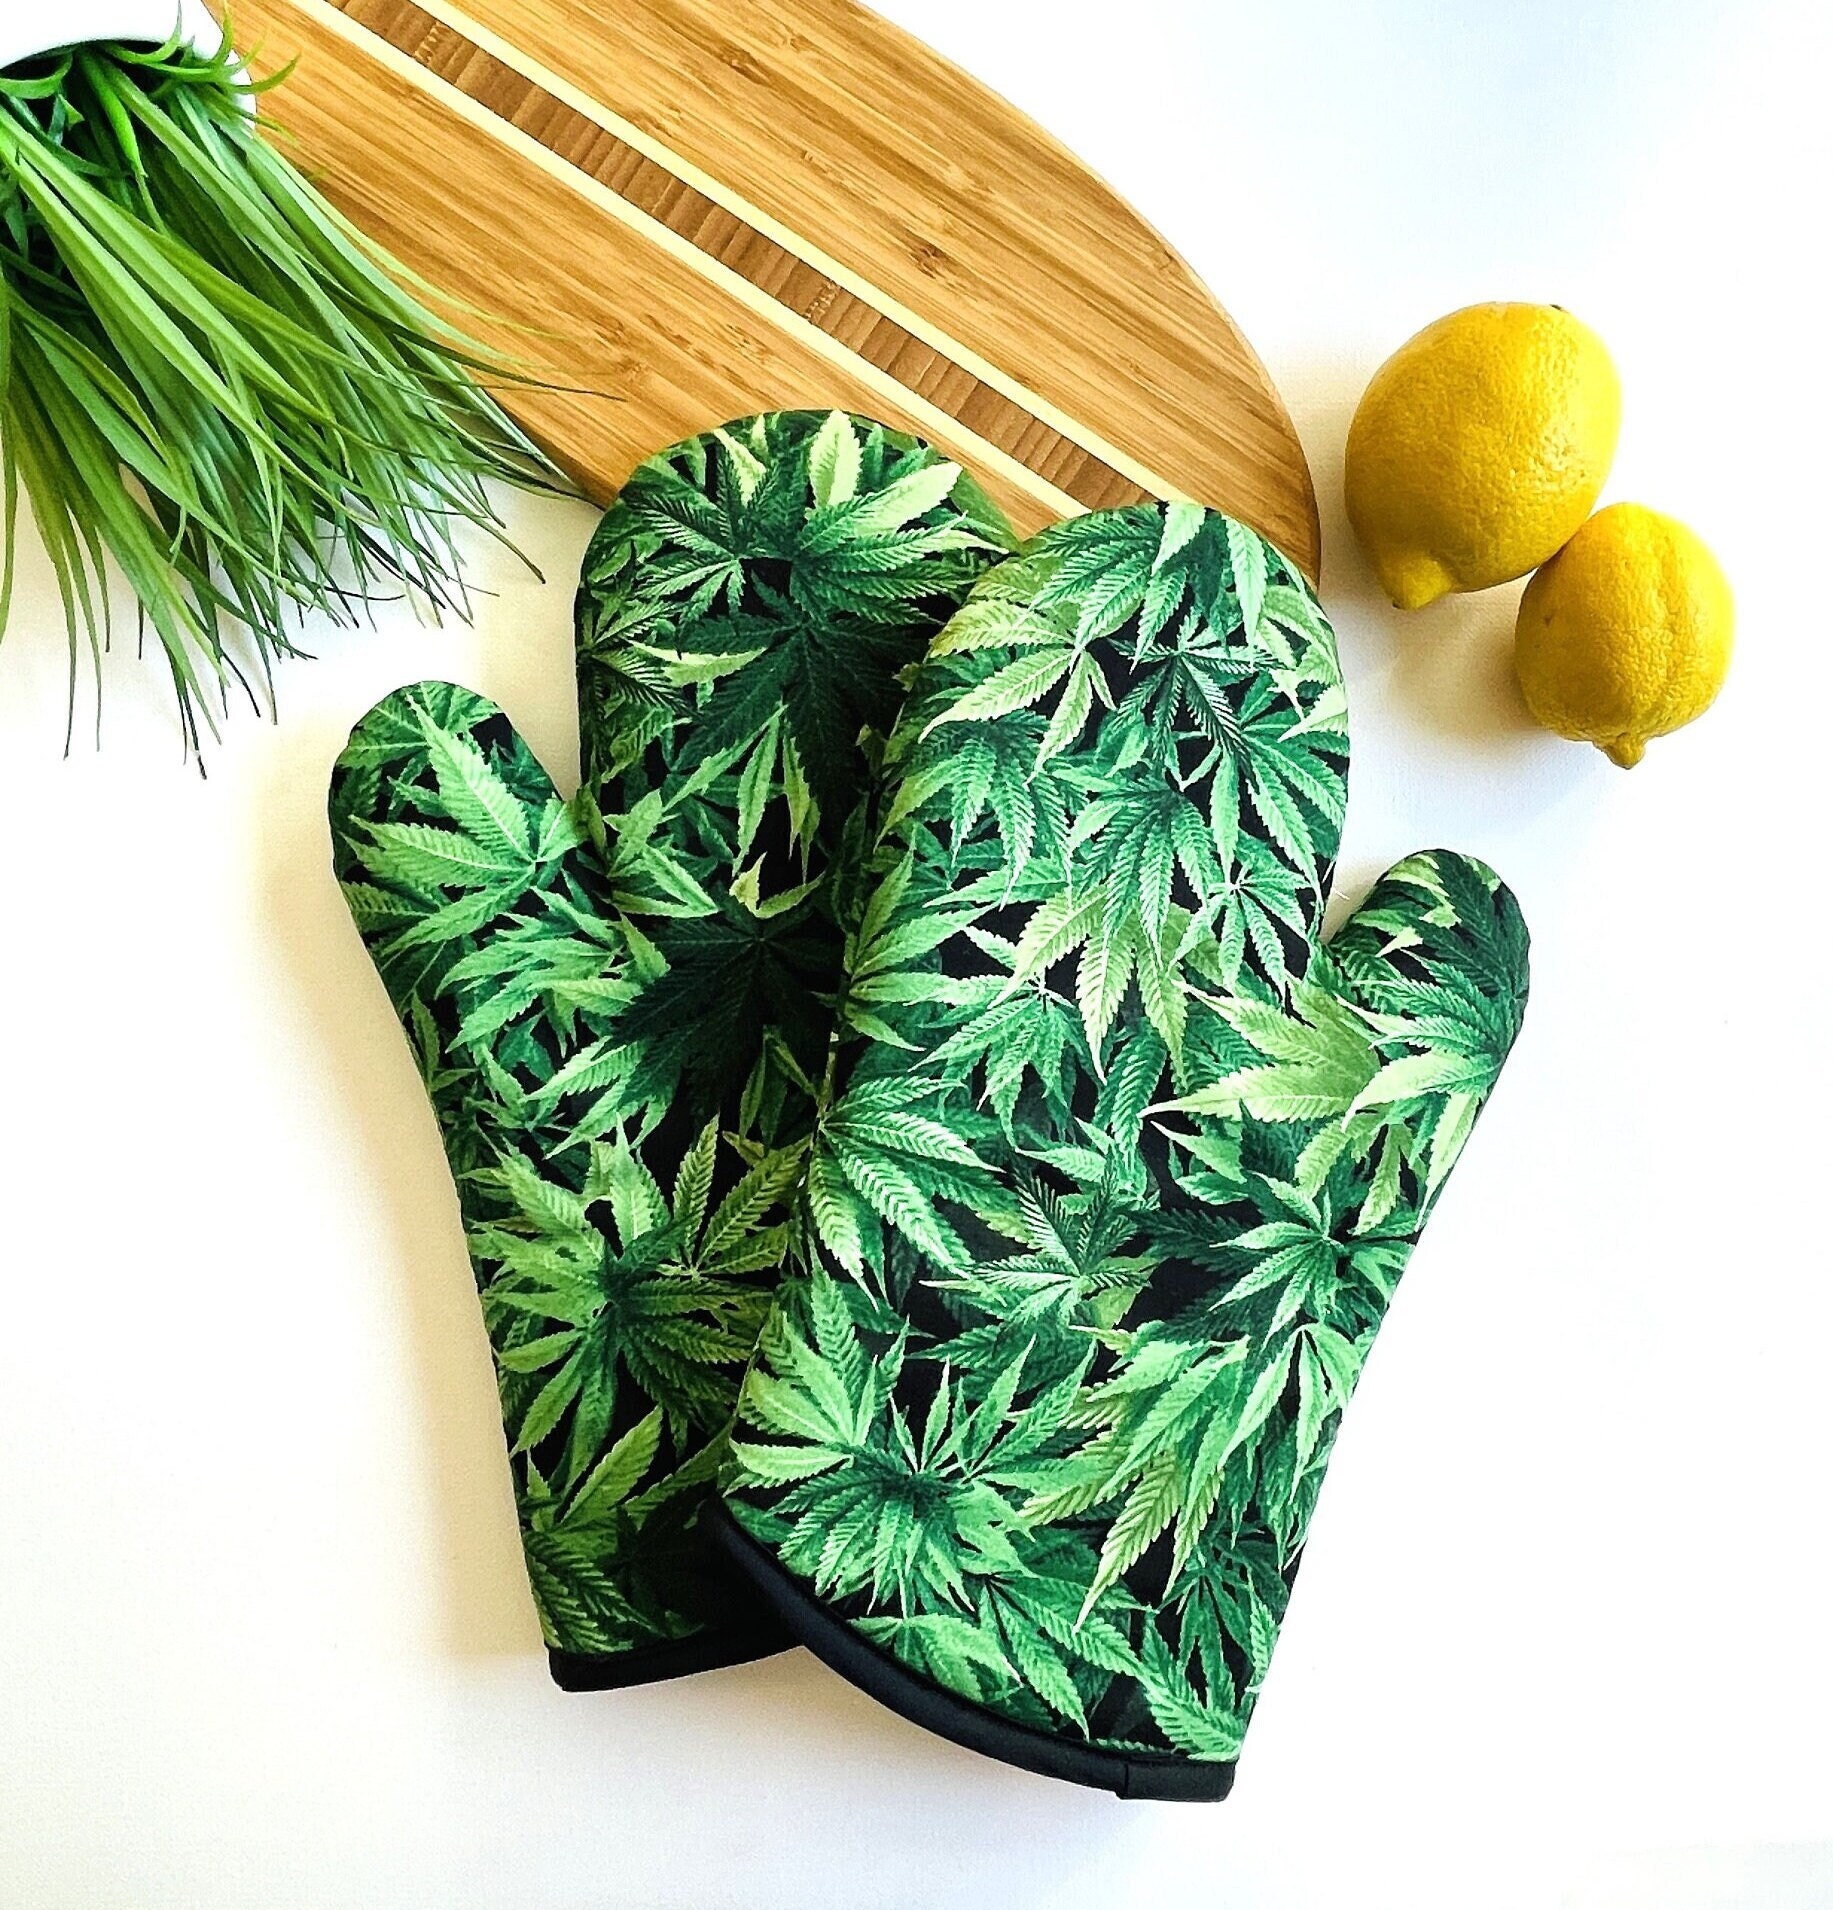  Funny Marijuana 420 Novelty Kitchen Accessories Preheat The  Oven for 420 It's Time to Get Baked Oven Pot Holder with Pocket (Preheat  420) : Home & Kitchen